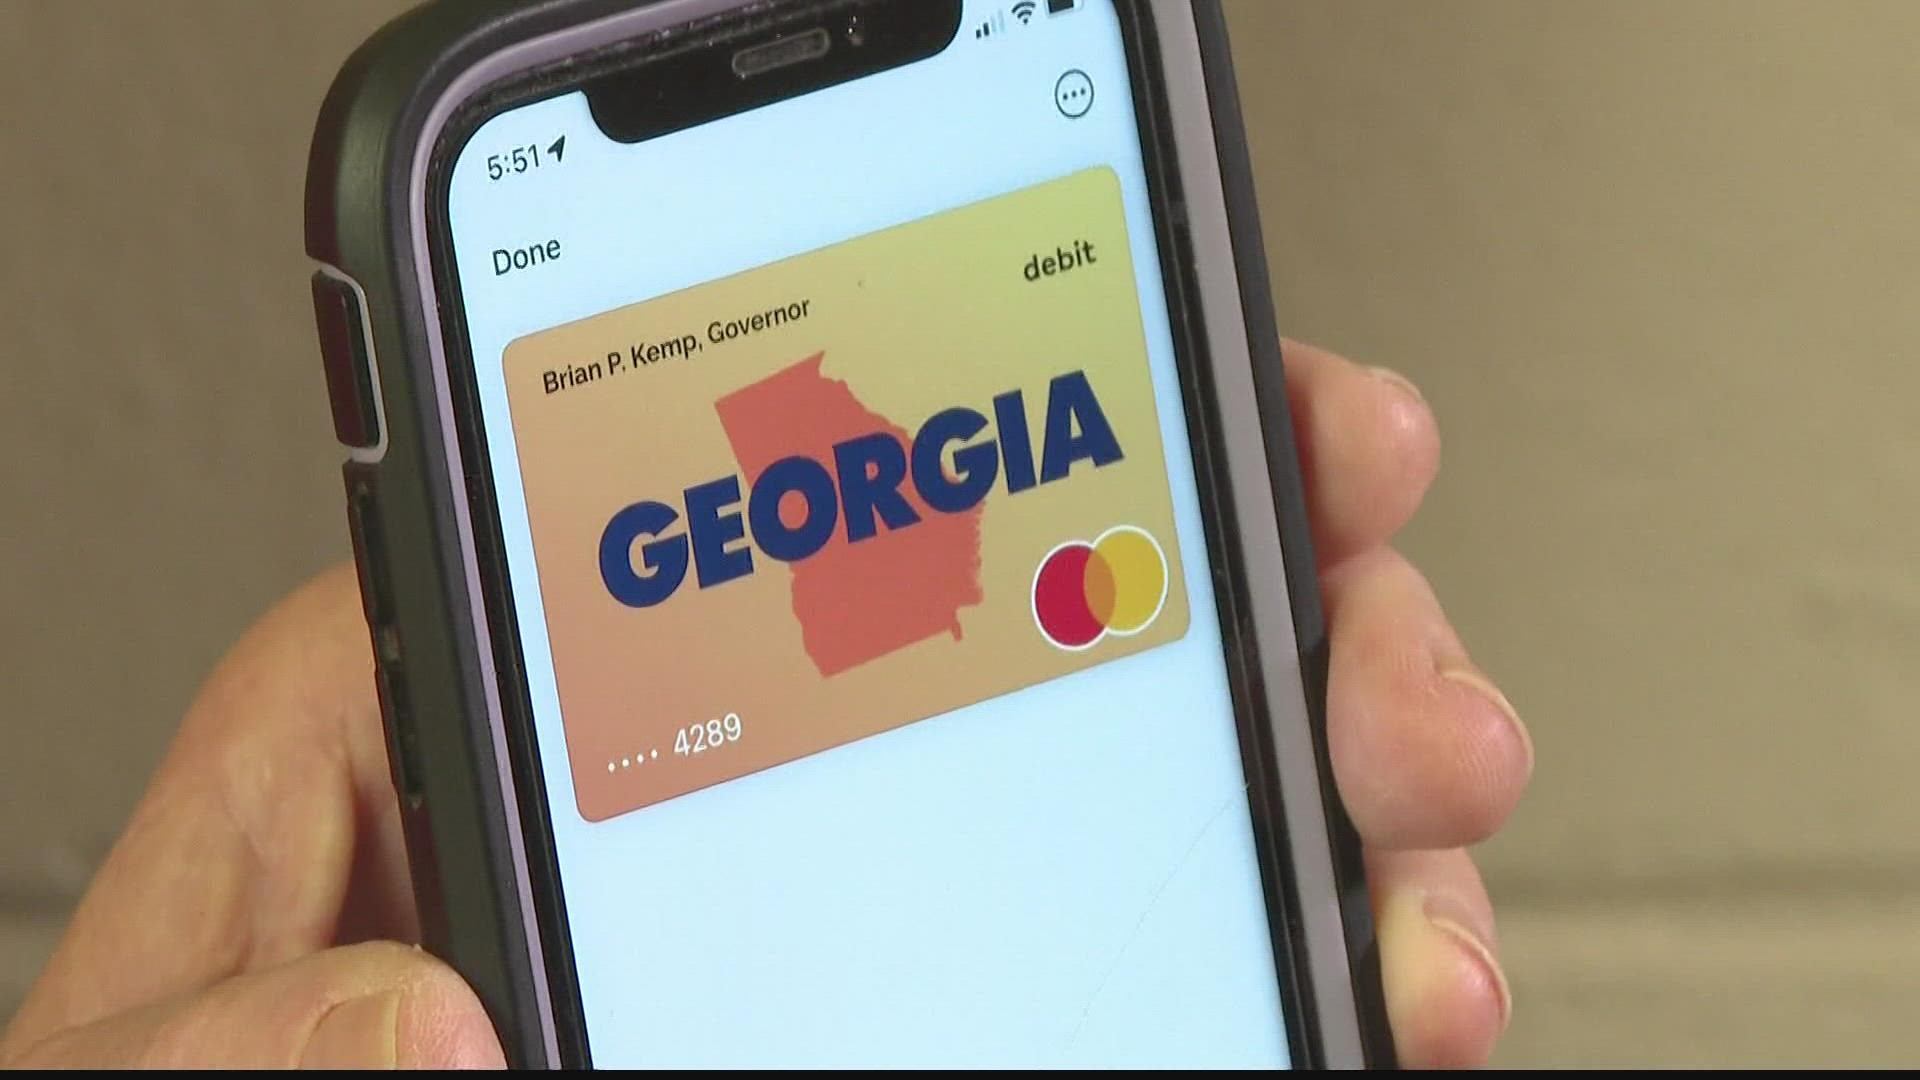 Georgians receiving government benefits are still having issues accessing cash payments doled out by the state.